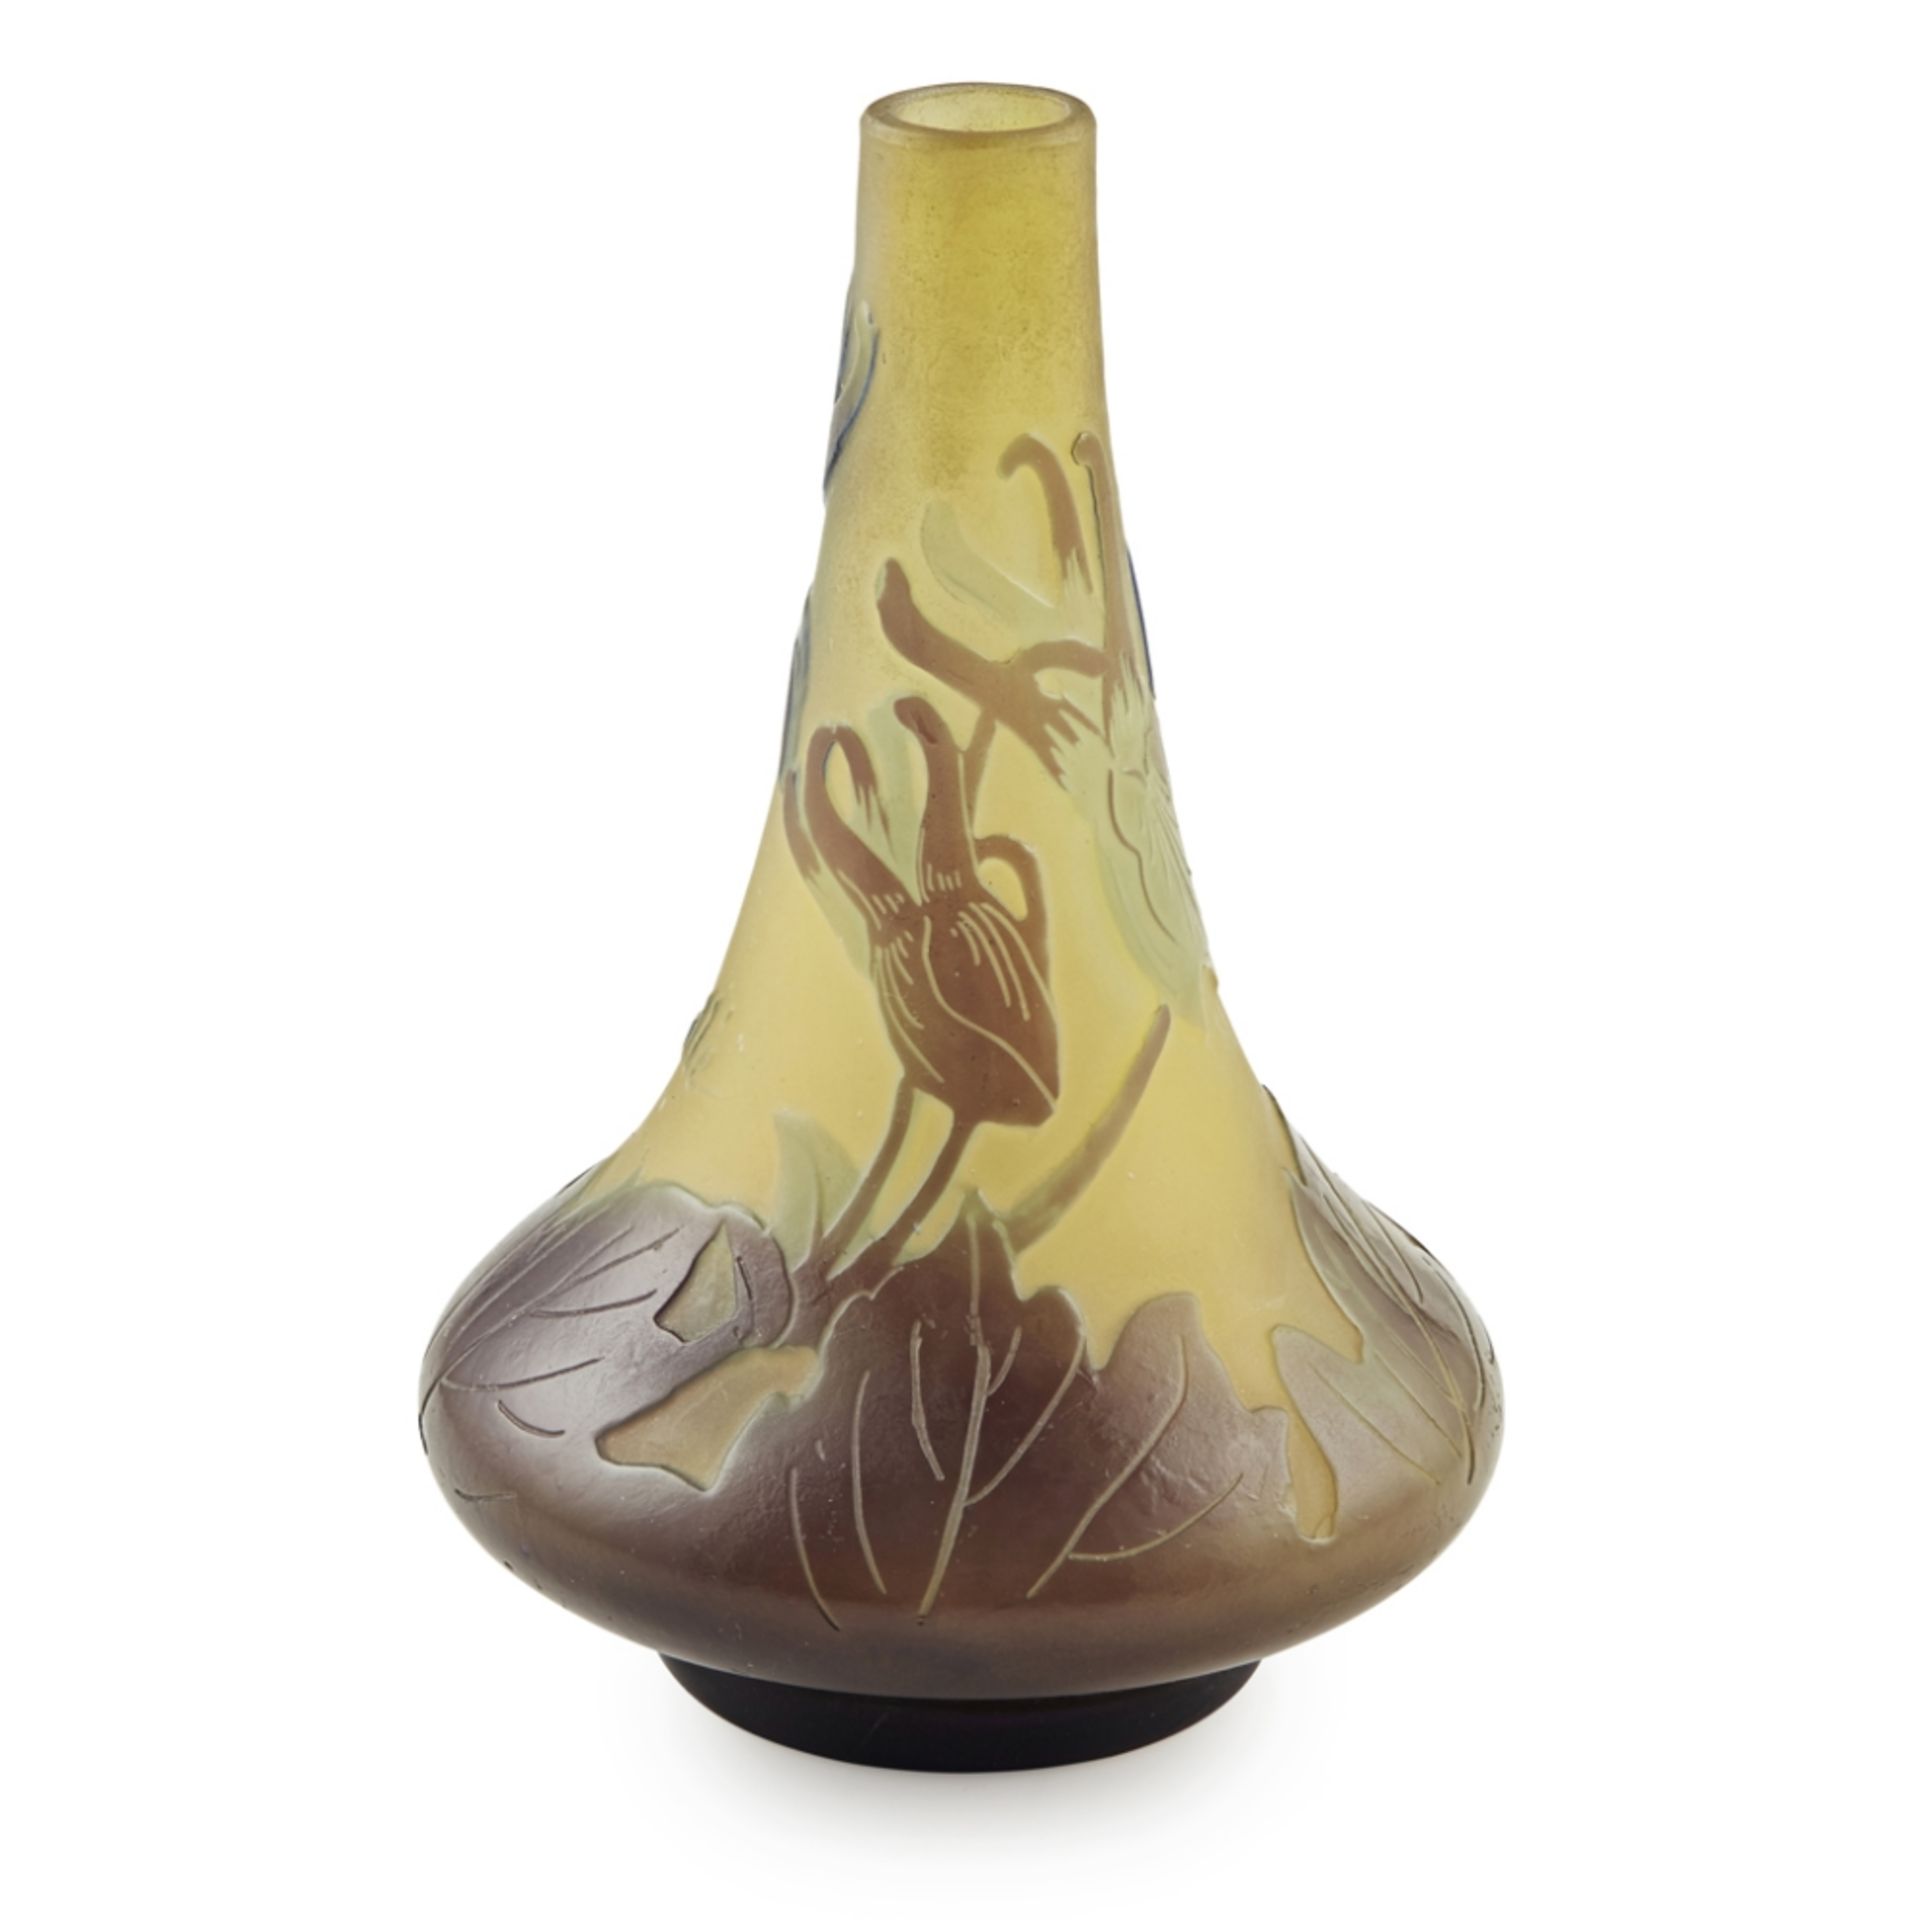 EMILE GALLÉ (1846-1904) CAMEO GLASS BOTTLE VASE, CIRCA 1910 the frosted glass body overlaid in